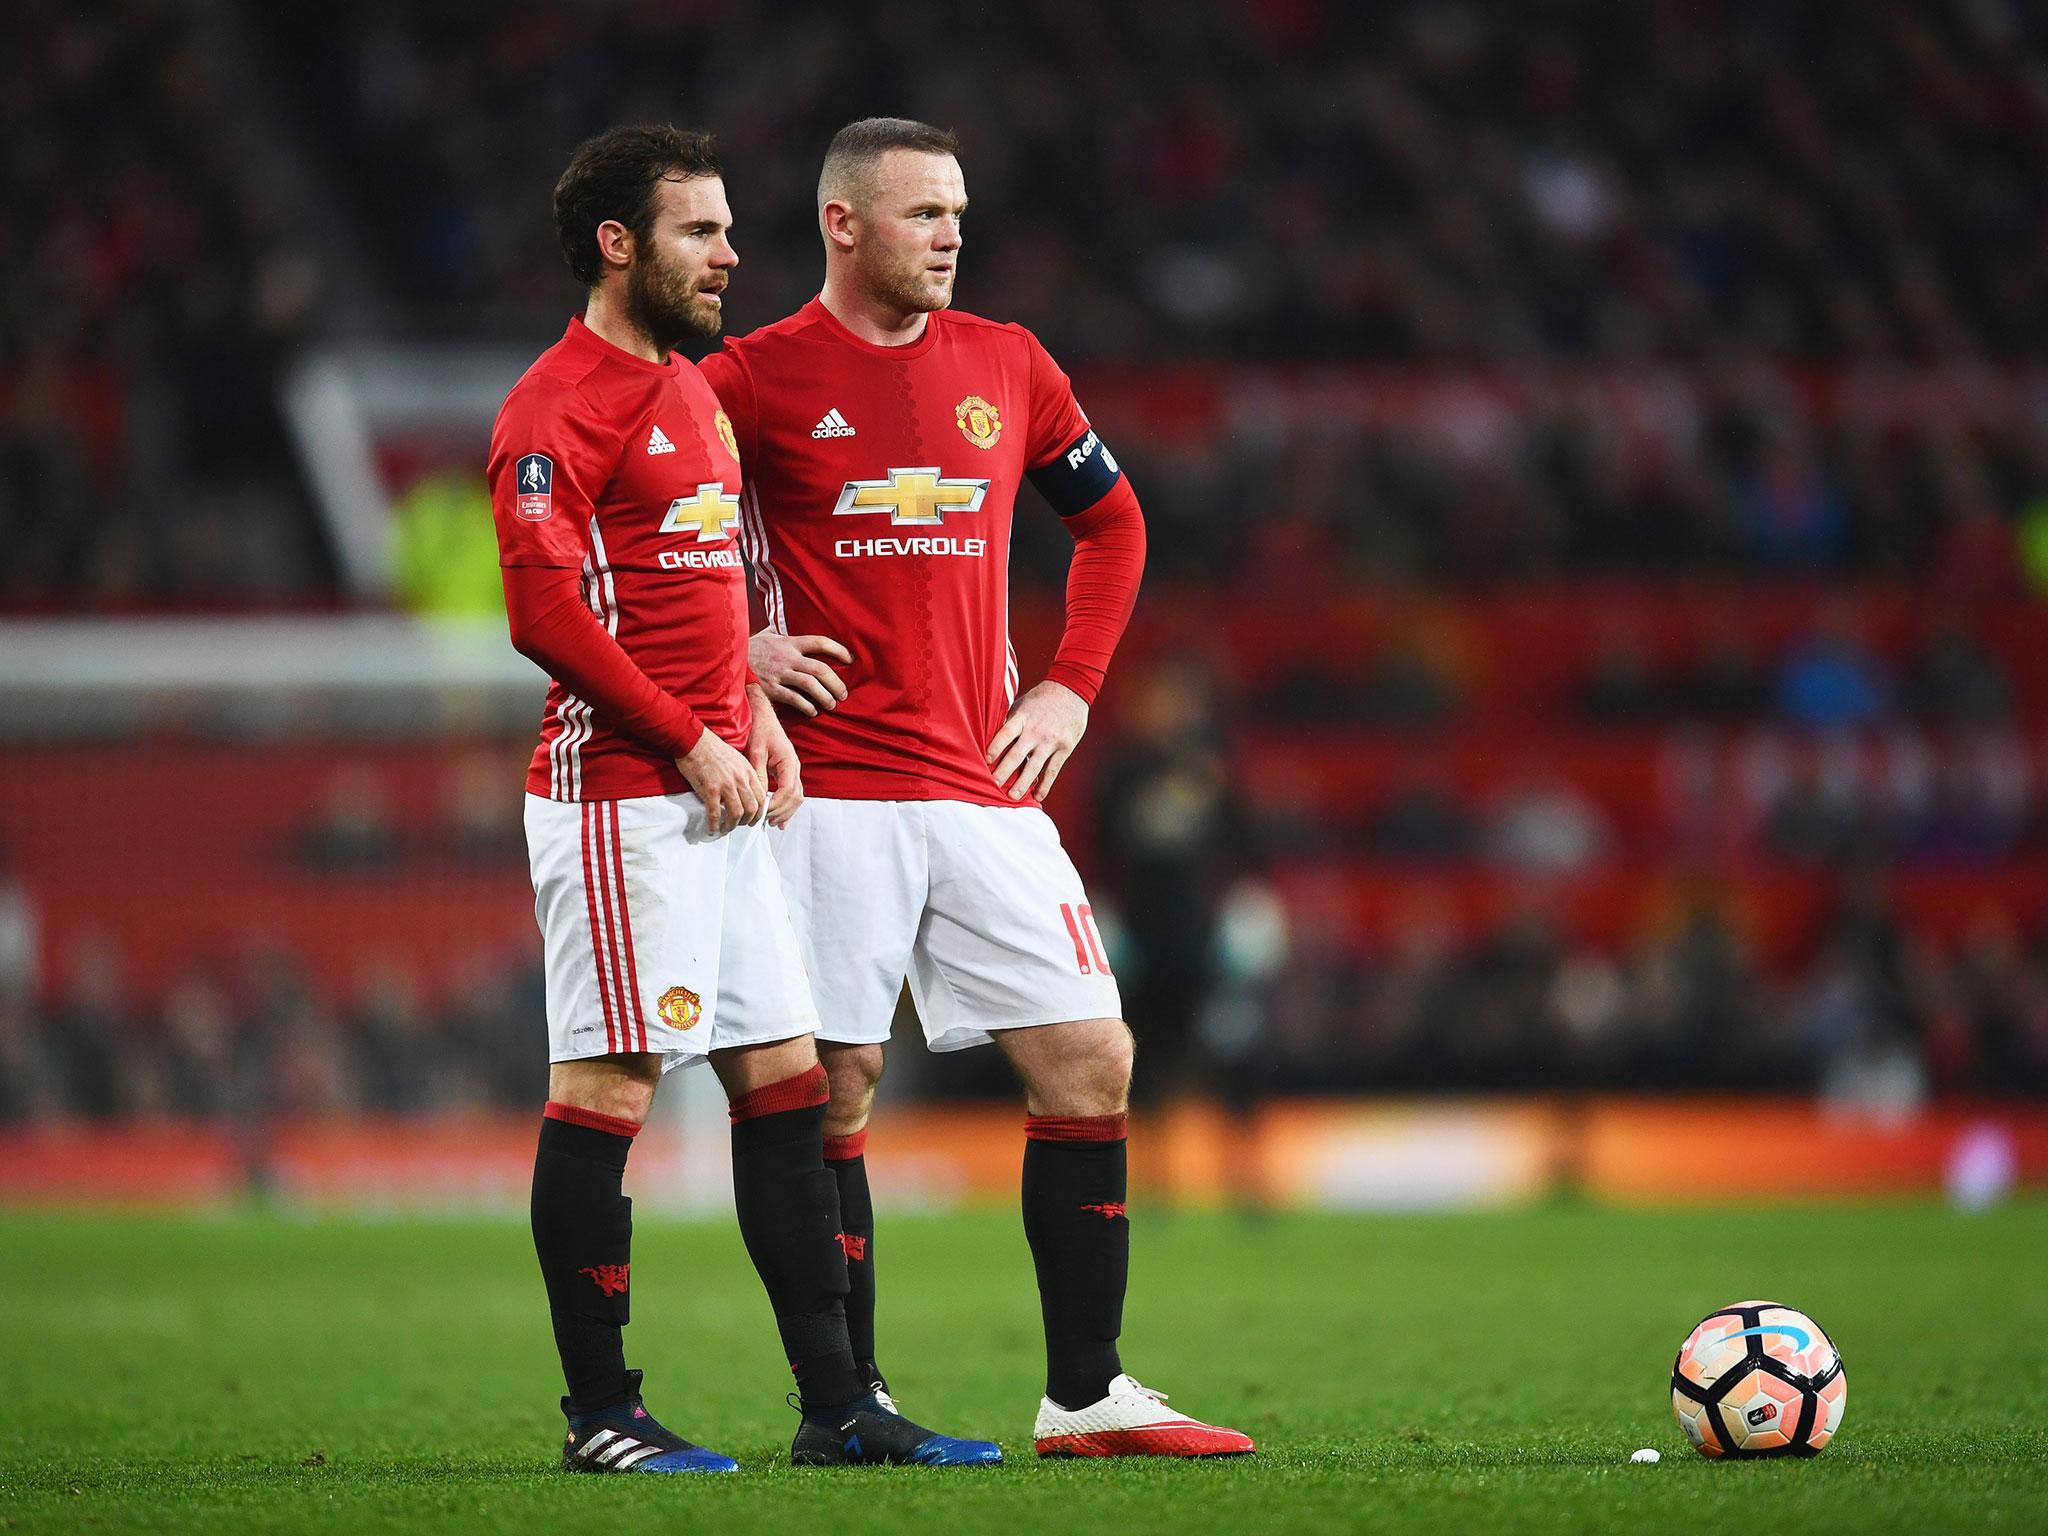 Juan Mata and Wayne Rooney during their time together at United